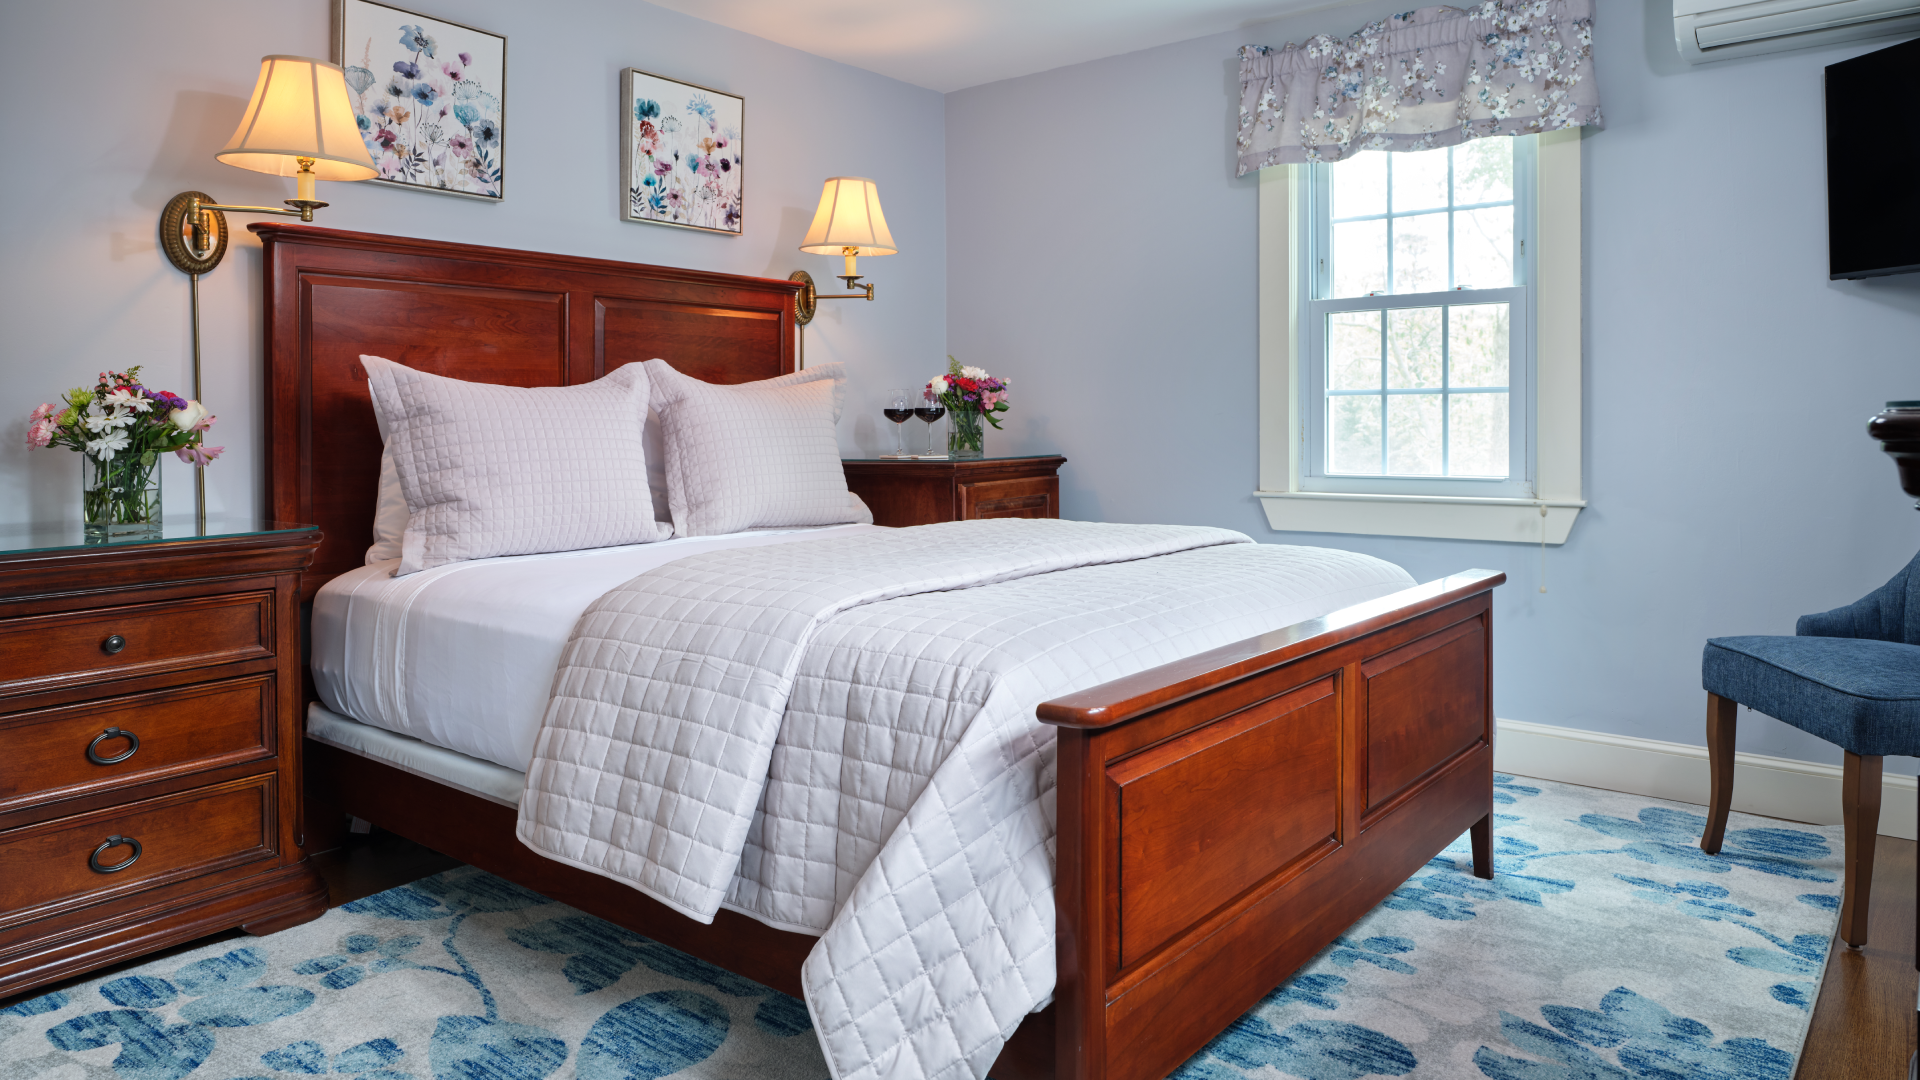 A guest room with a wooden Queen Size bed and two bedside tables